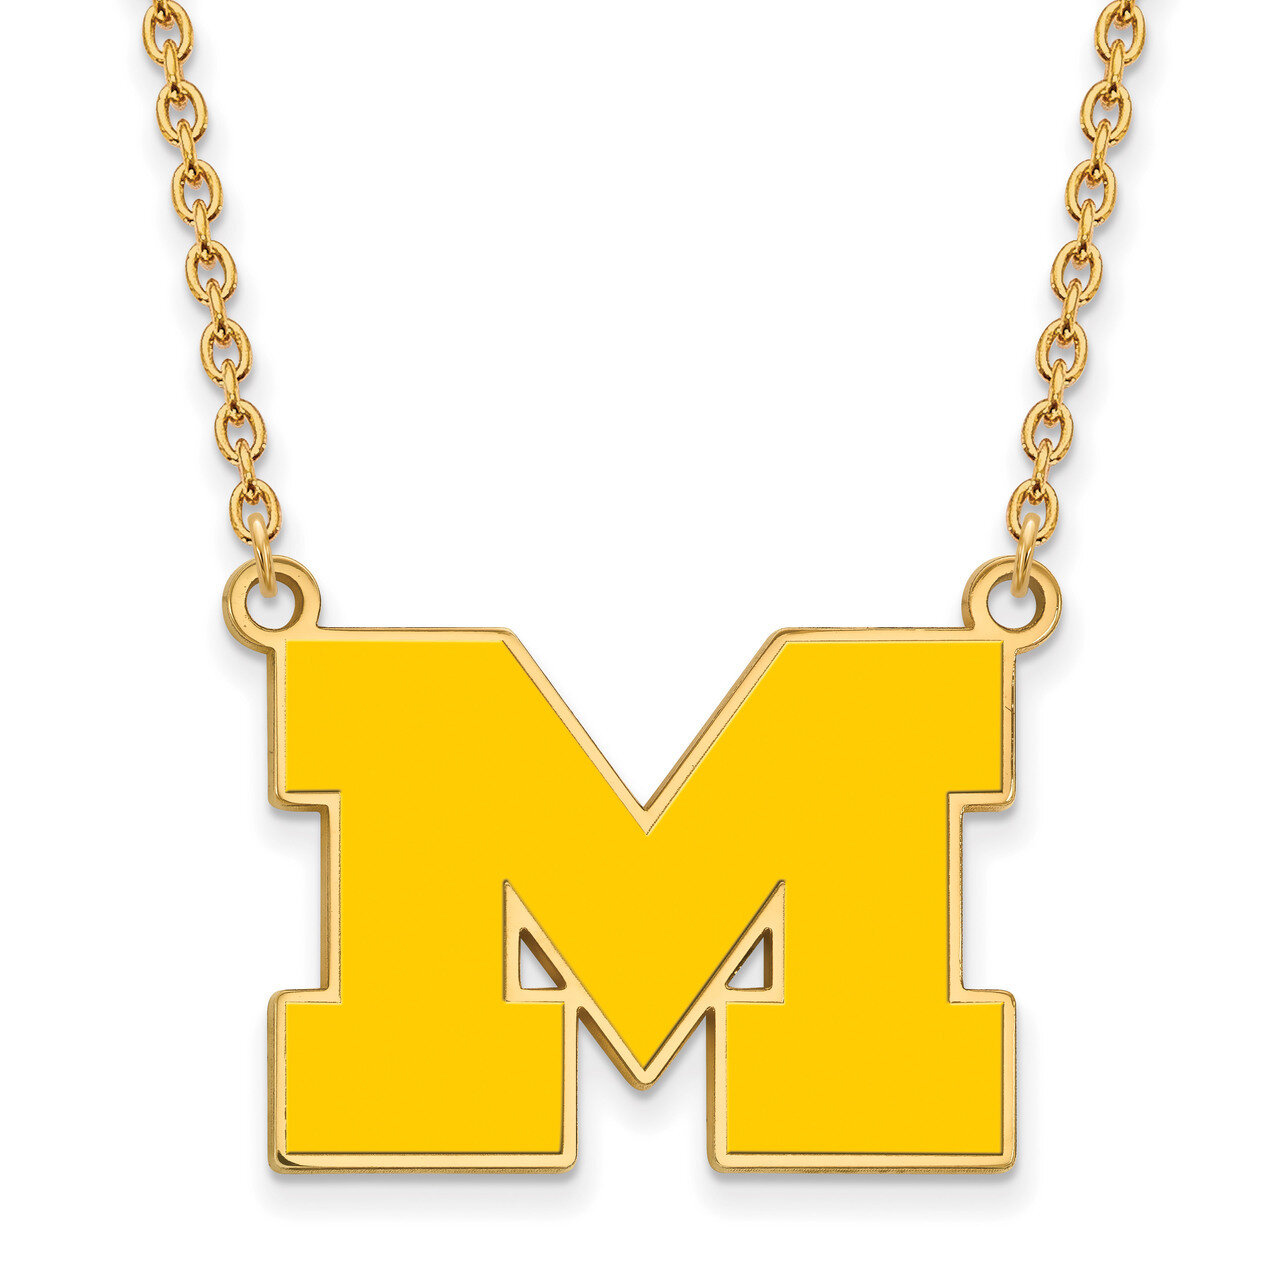 Michigan University of Lg Enl Pendant with Necklace Gold-plated Sterling Silver GP017UM-18